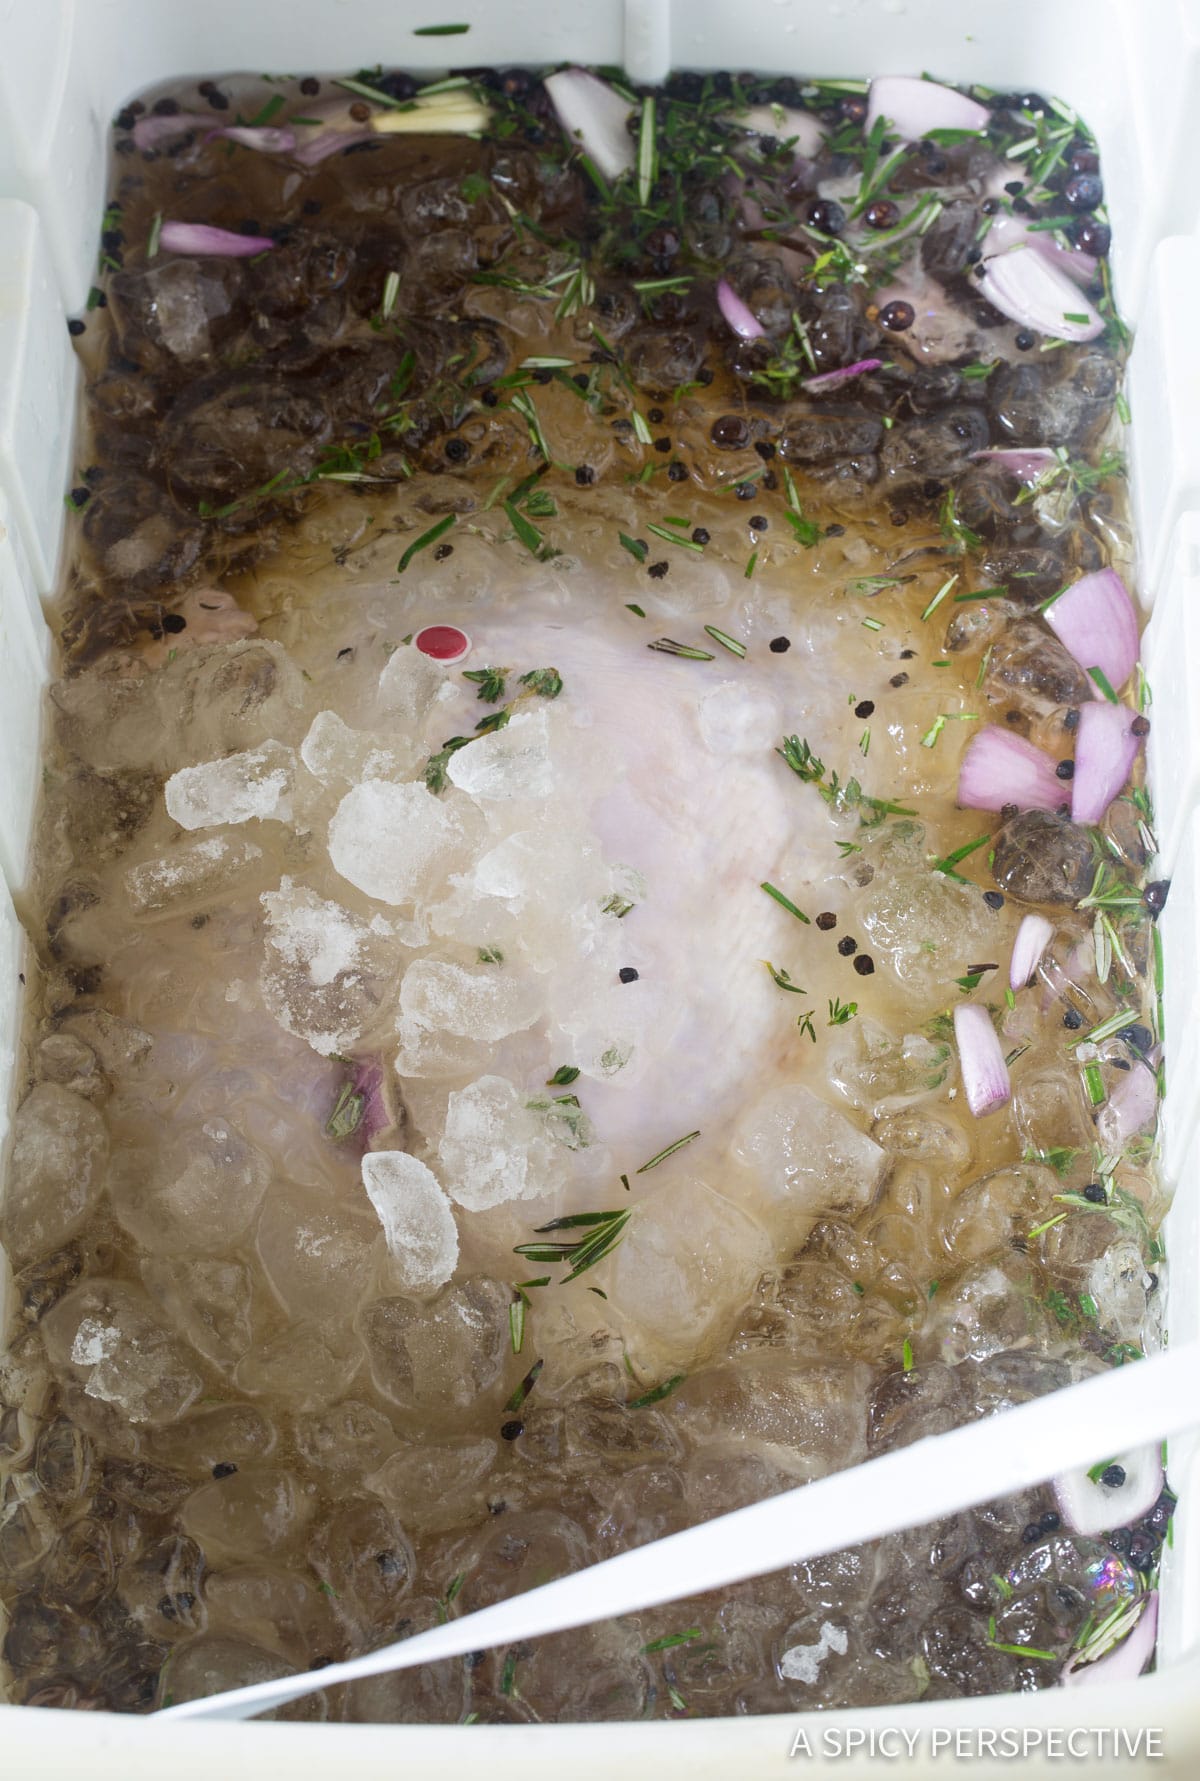 Simple Ice and flavor bath for the turkey 
